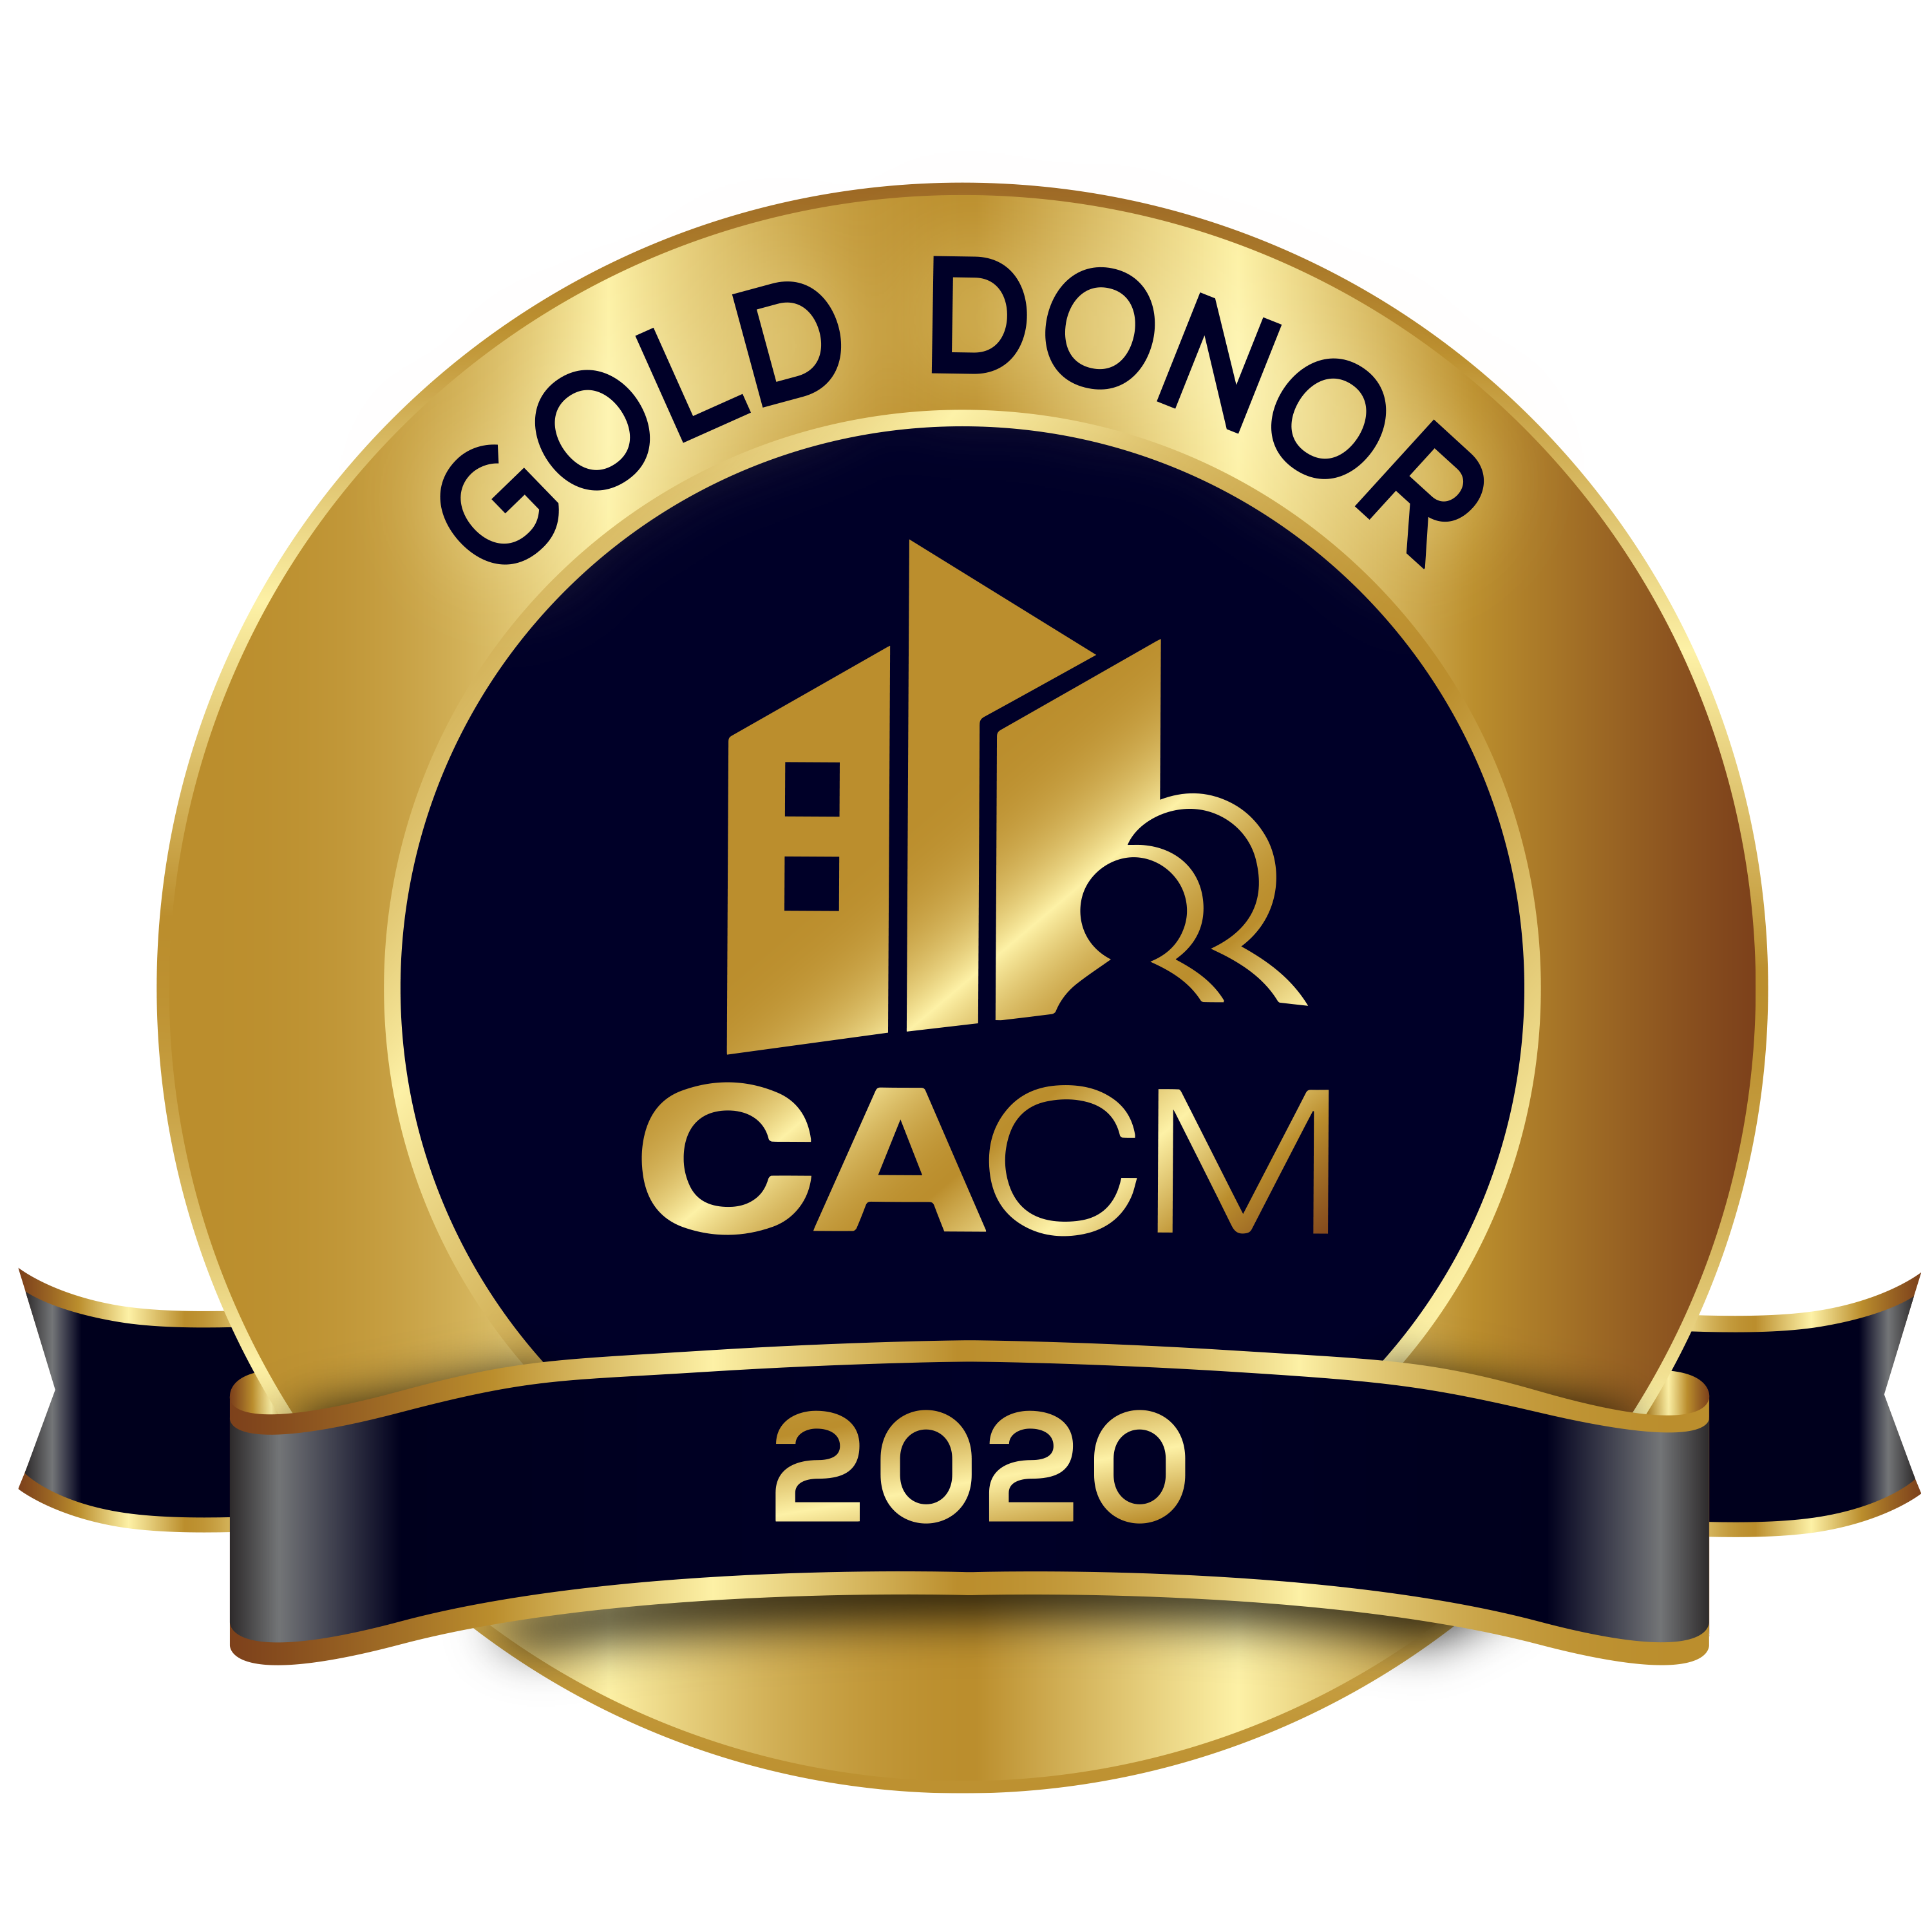 Adams Stirling CACM Gold Donor